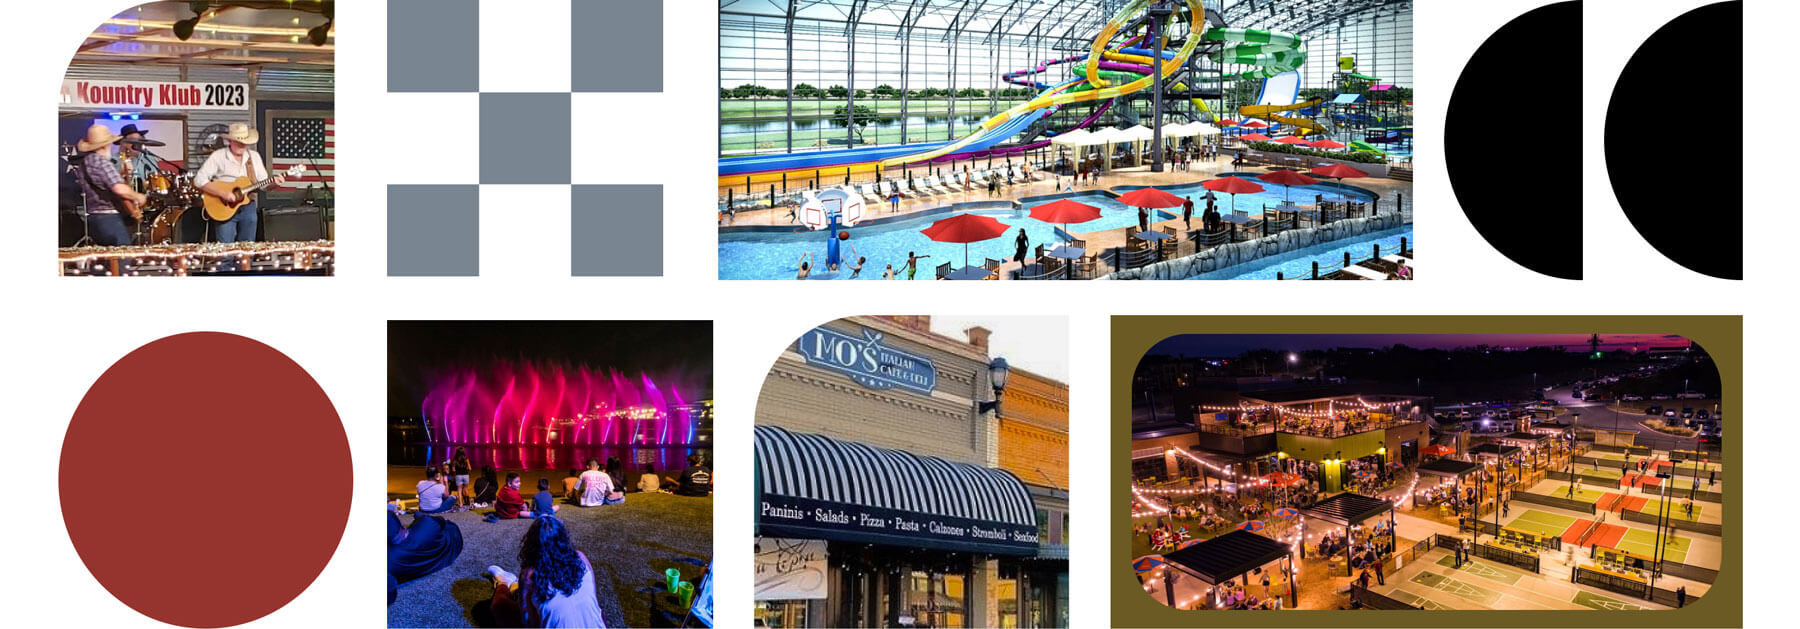 A collage of various venues and events, possibly from a city's attractions in new homes in Mansfield TX, featuring live music, water park, nighttime outdoor setting, shopping area, and logo elements.